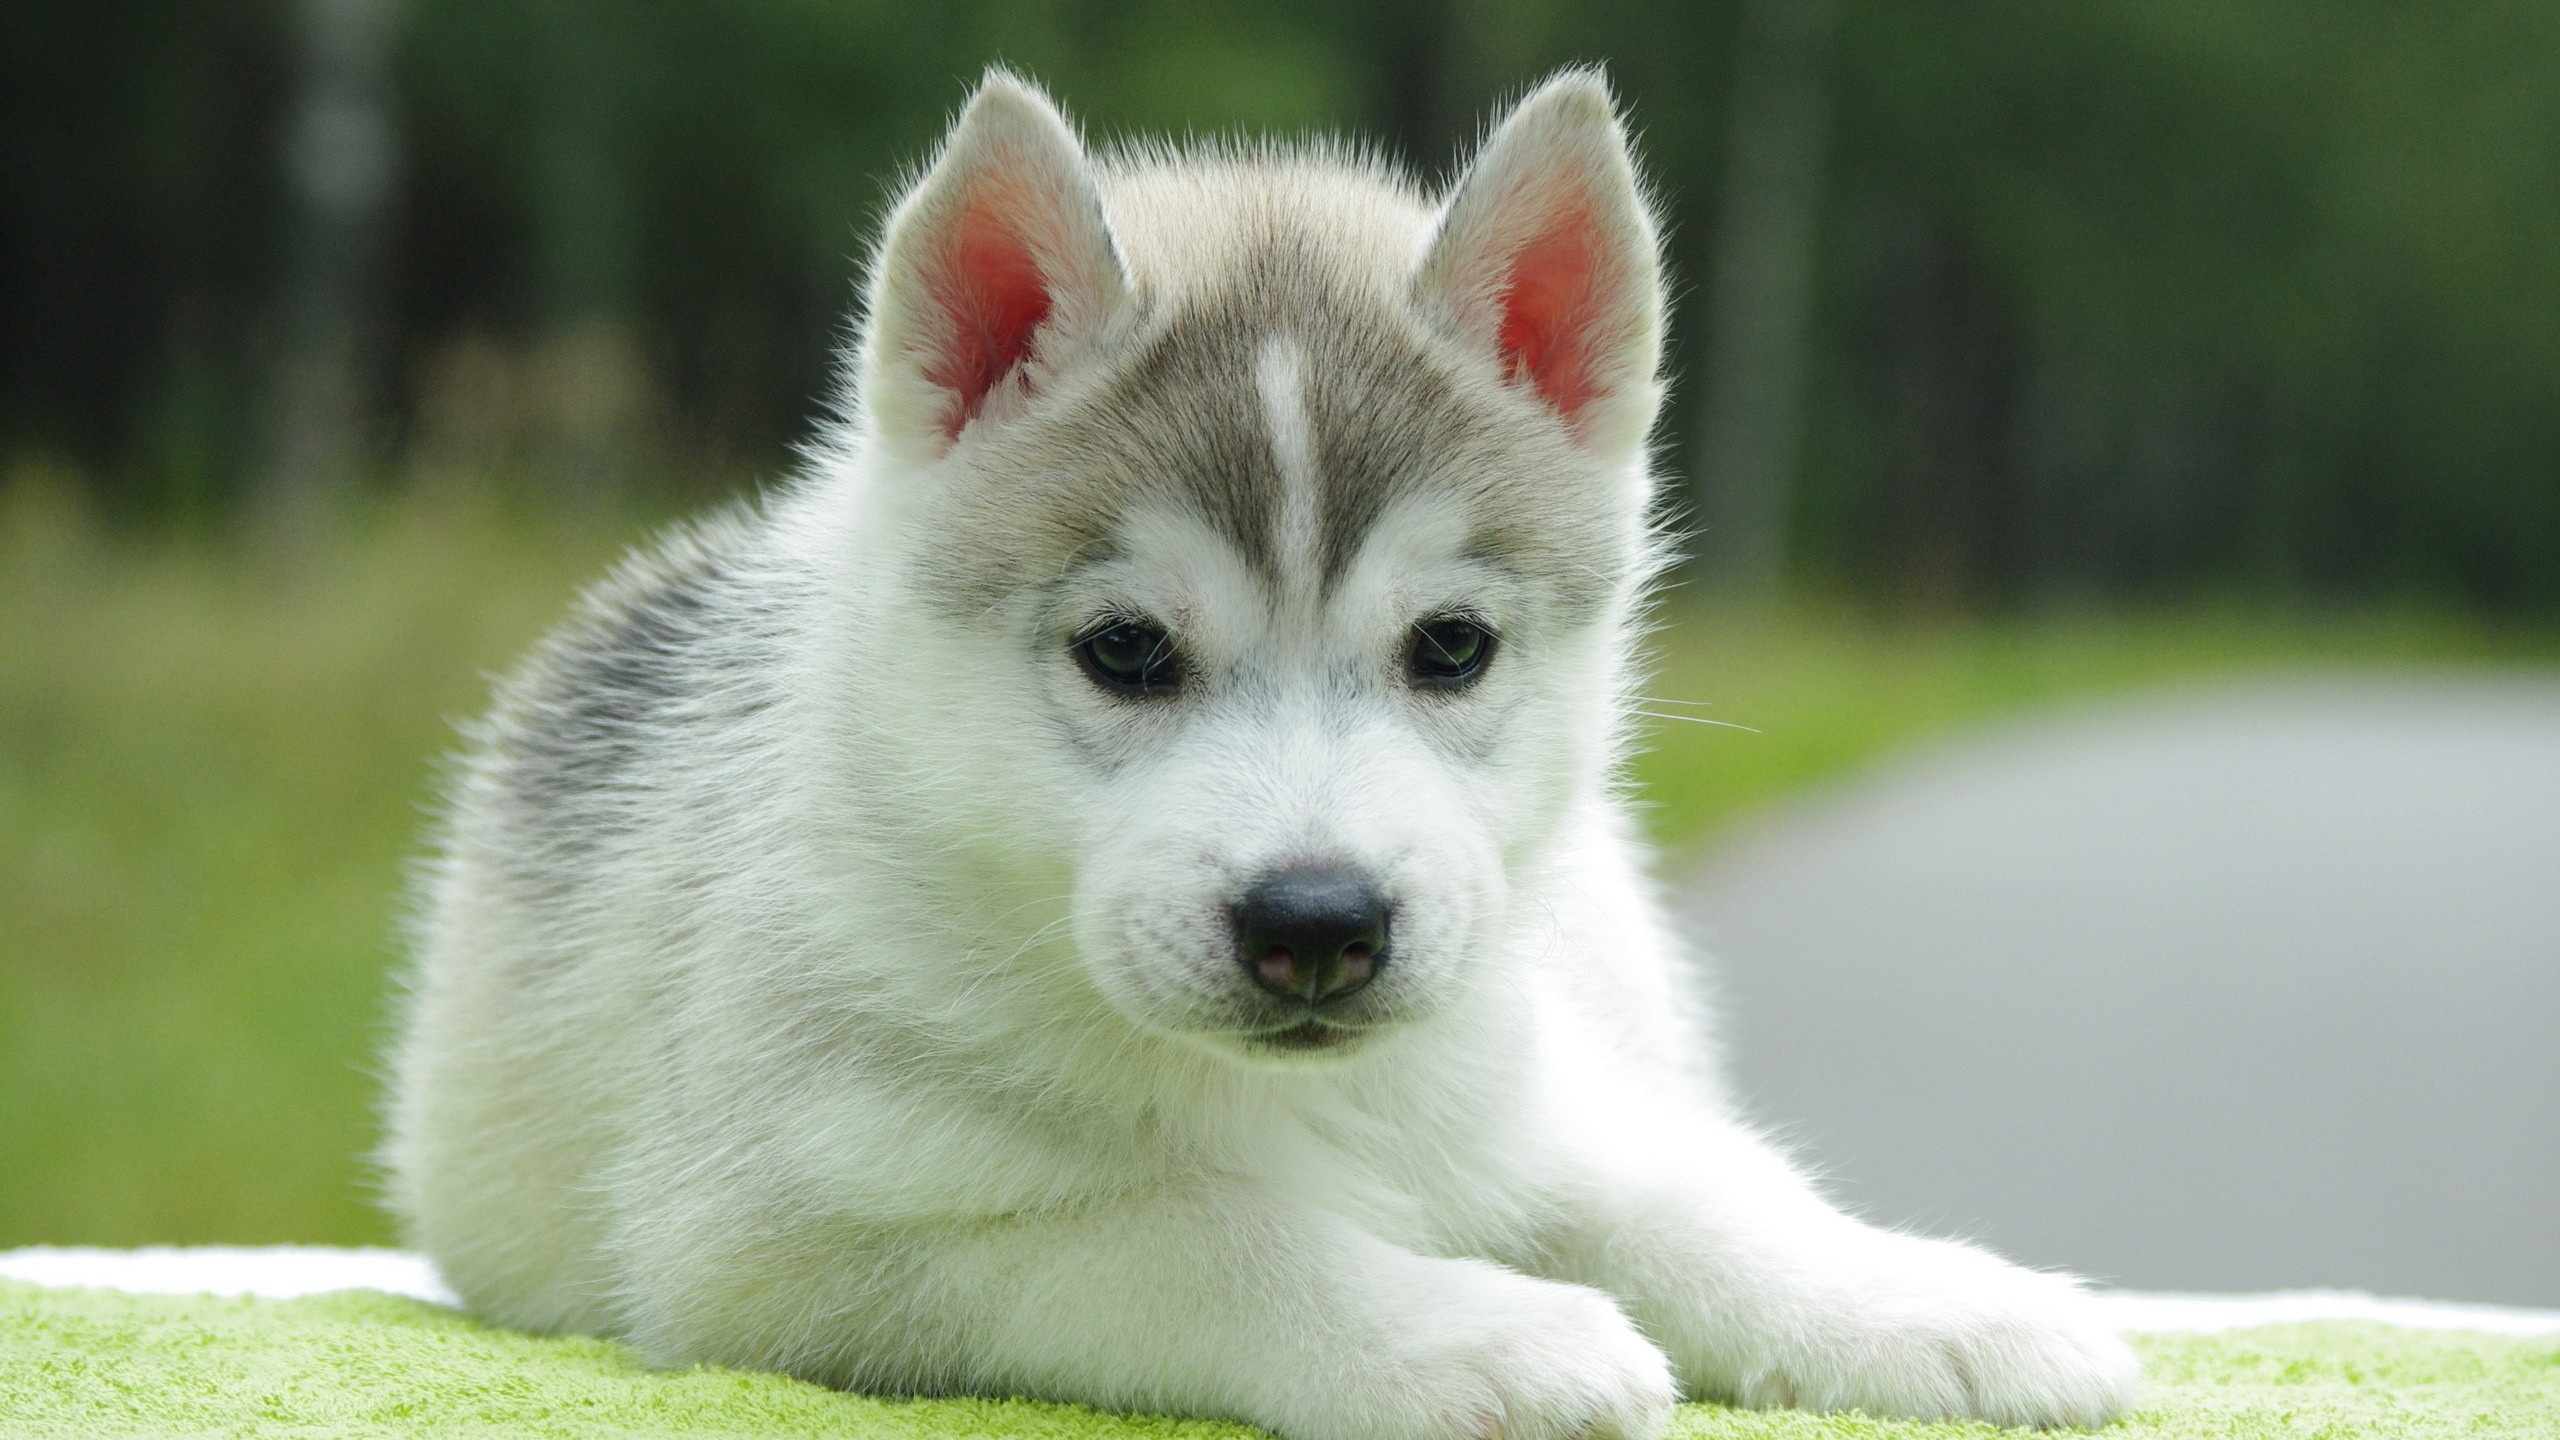 White and Black Siberian Husky Puppy on Green Grass During Daytime. Wallpaper in 2560x1440 Resolution